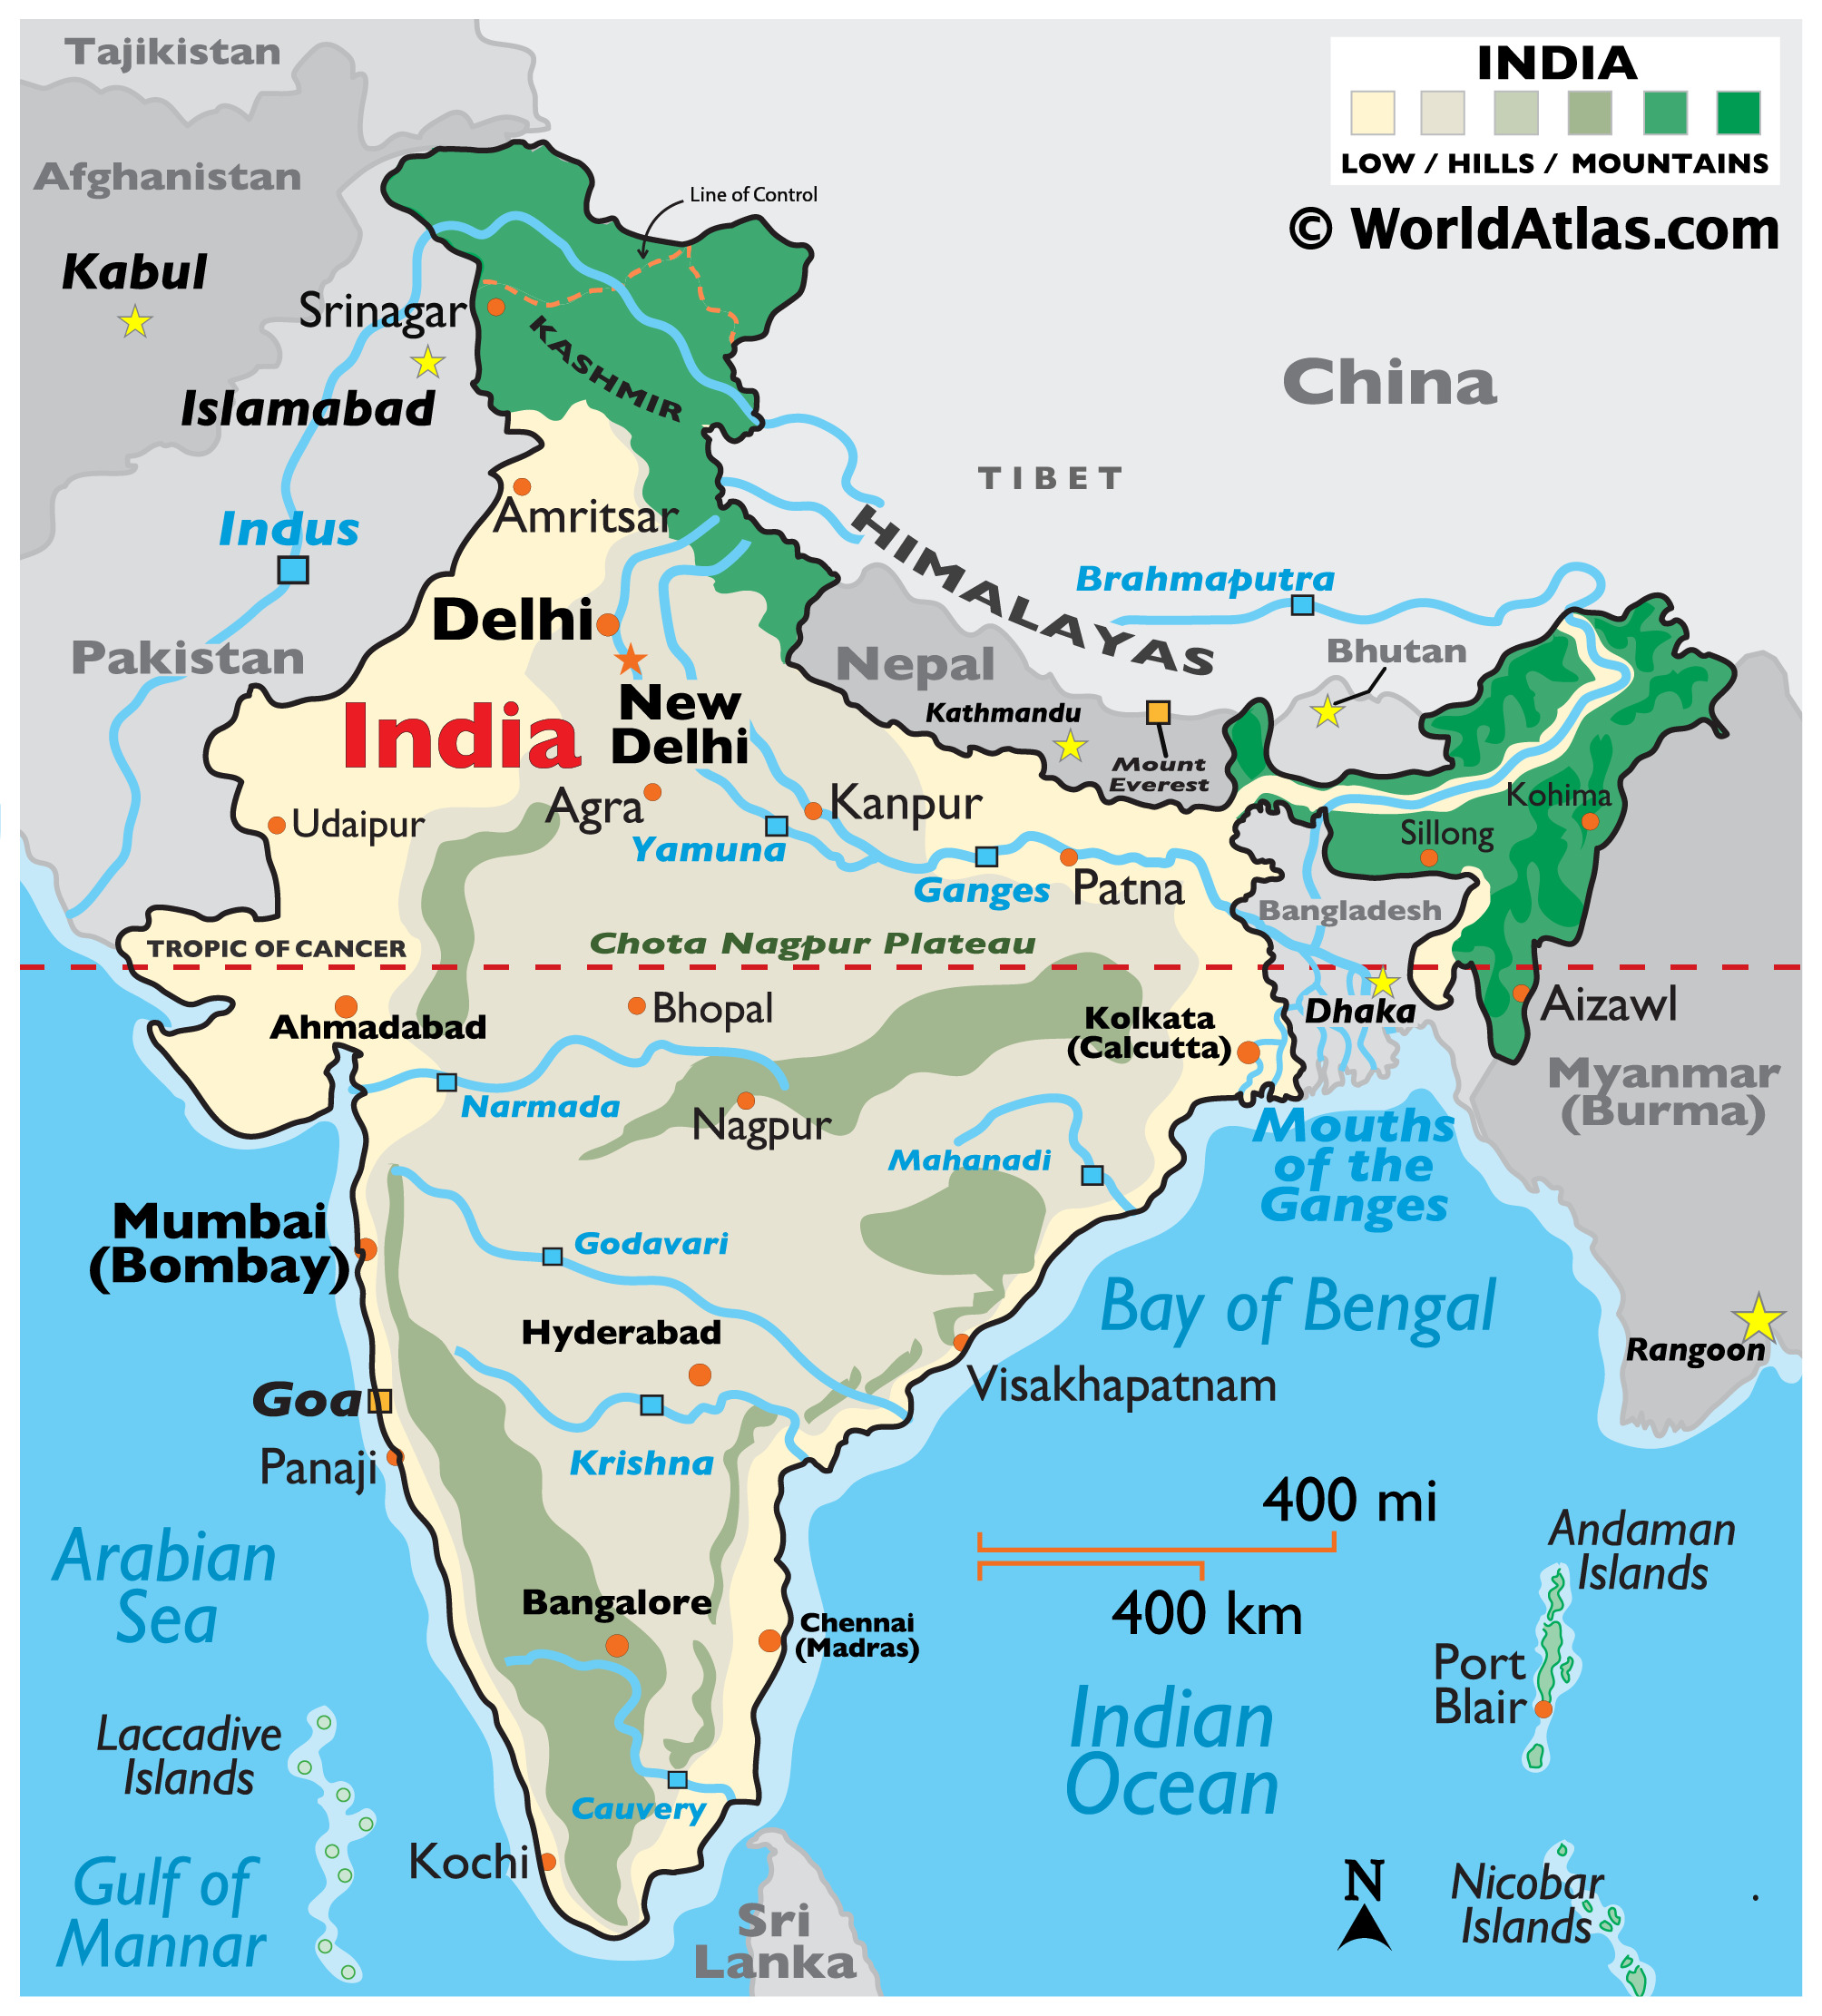 Geo Map - Asia | Geo Map - Asia - Pakistan | South Asia - Political map |  South Asia Drawing Map